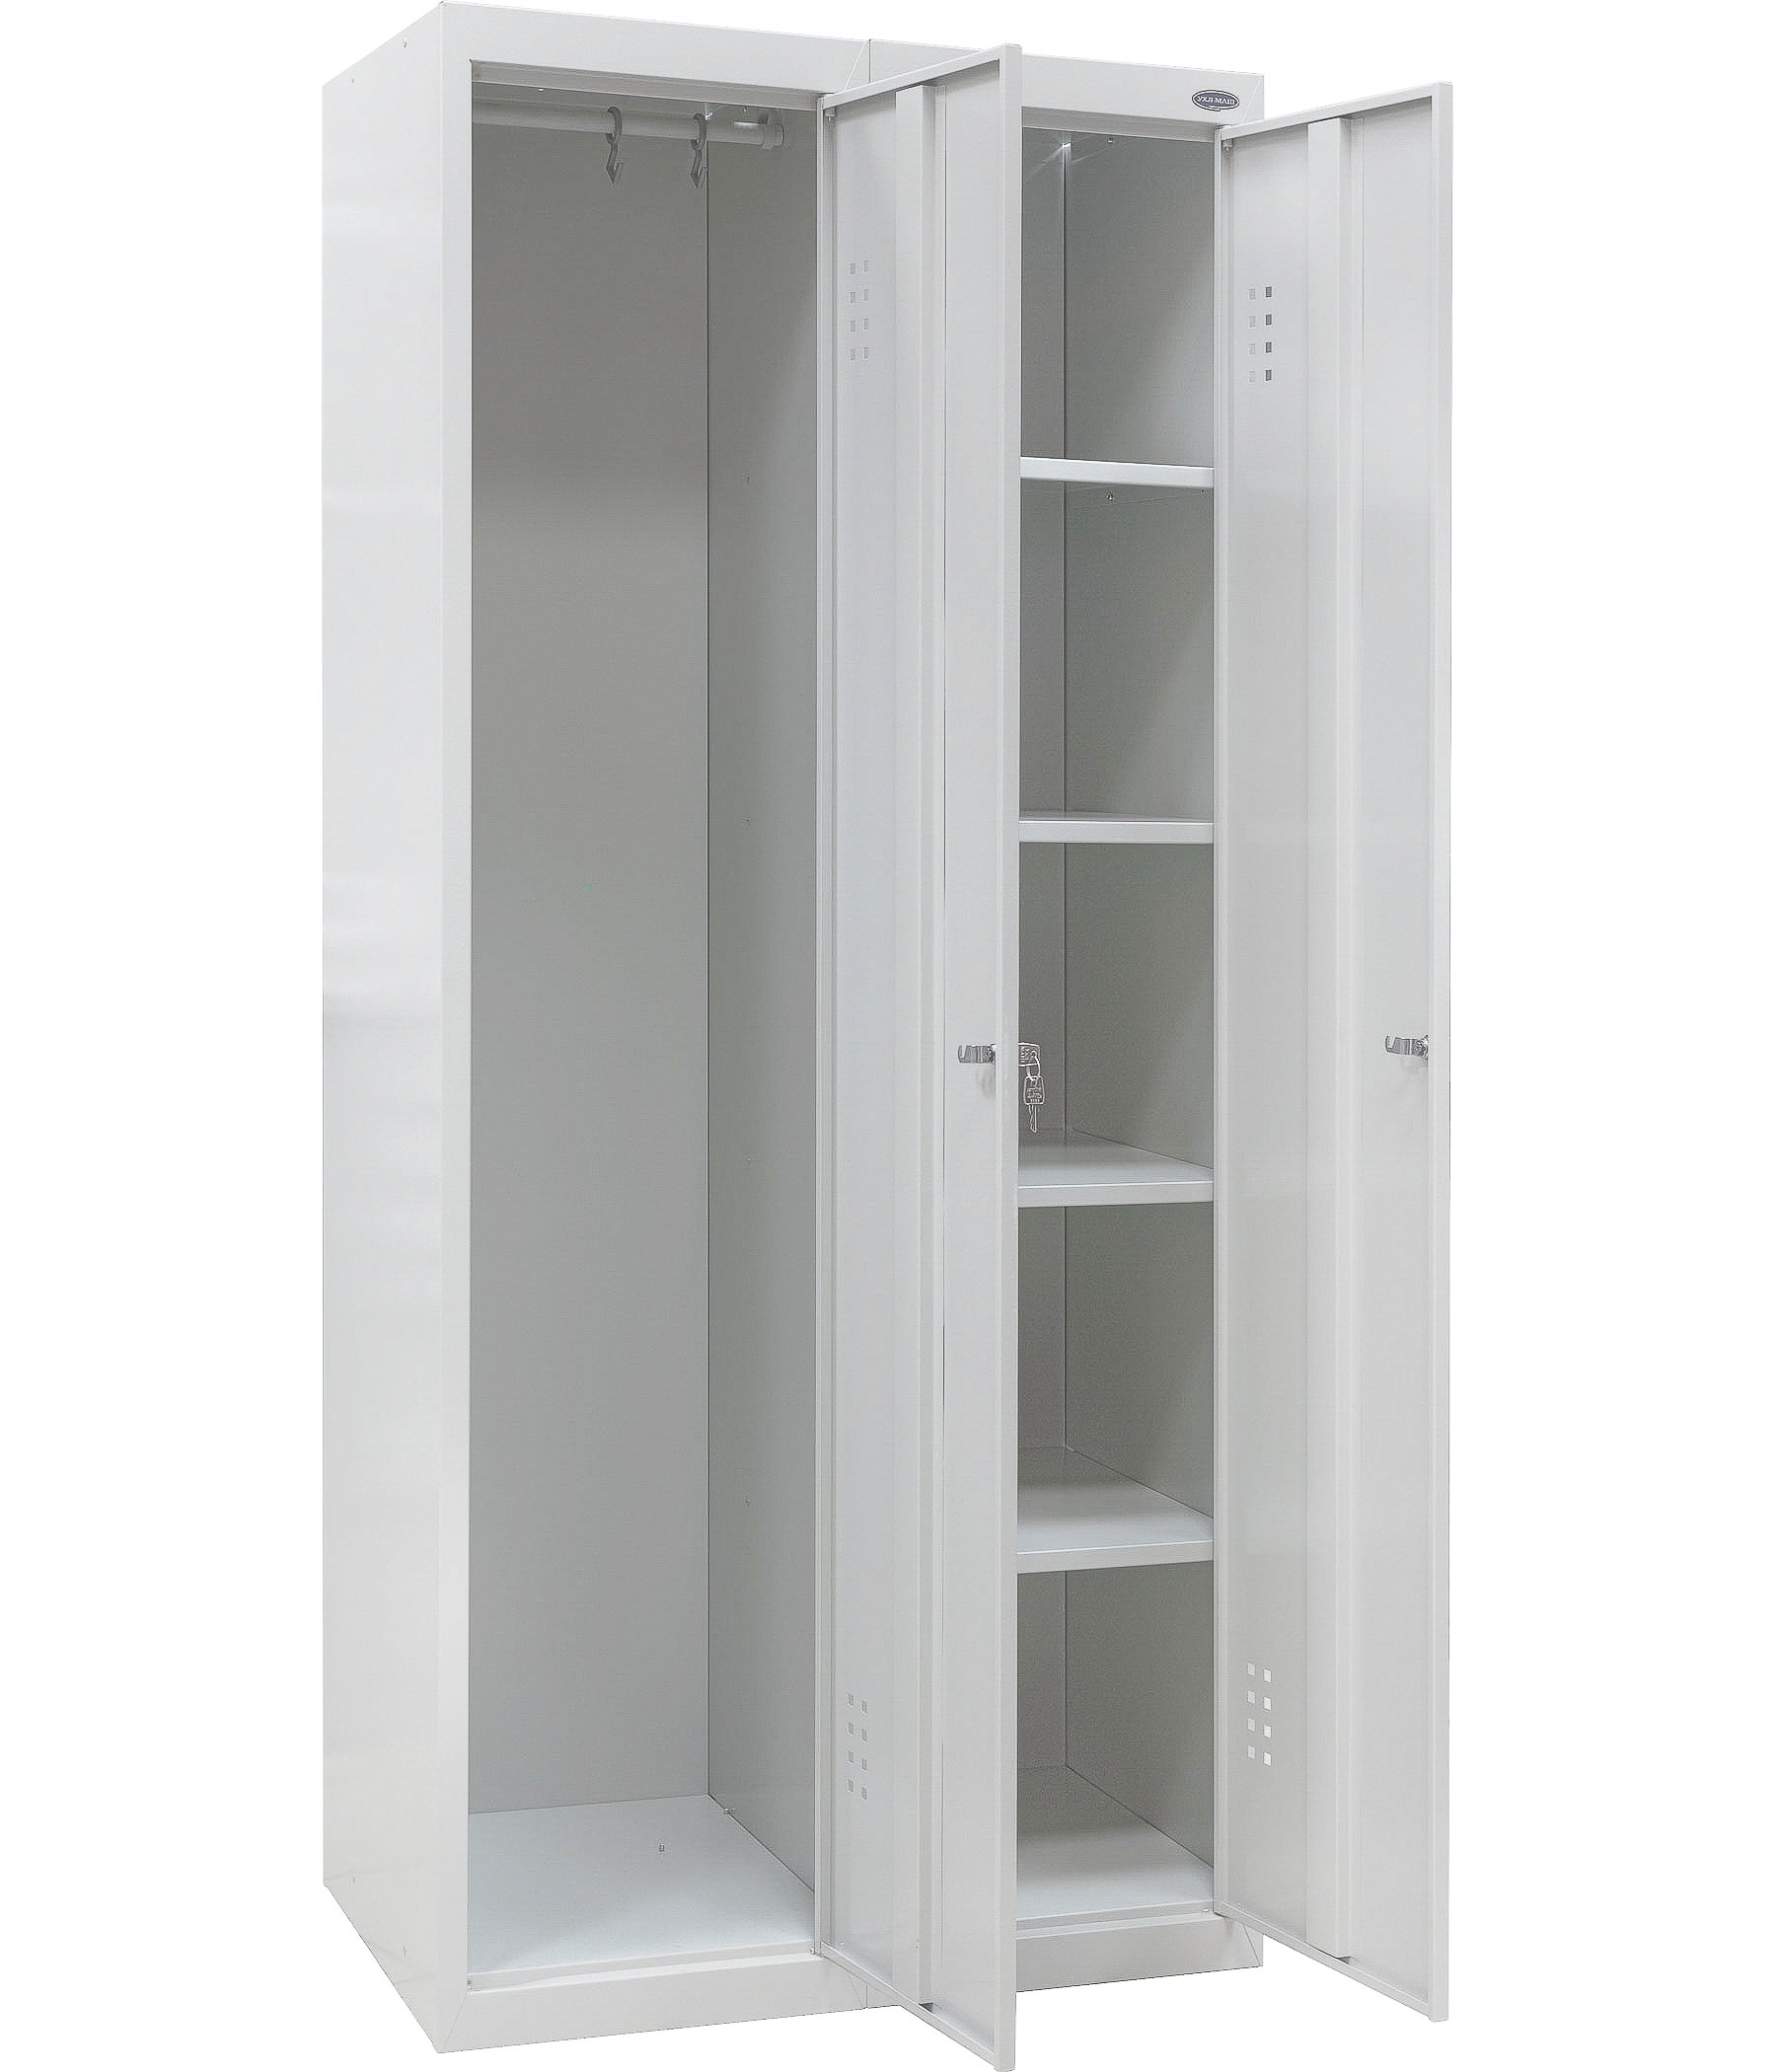 The interior space of the utility cabinet SMX-400/2